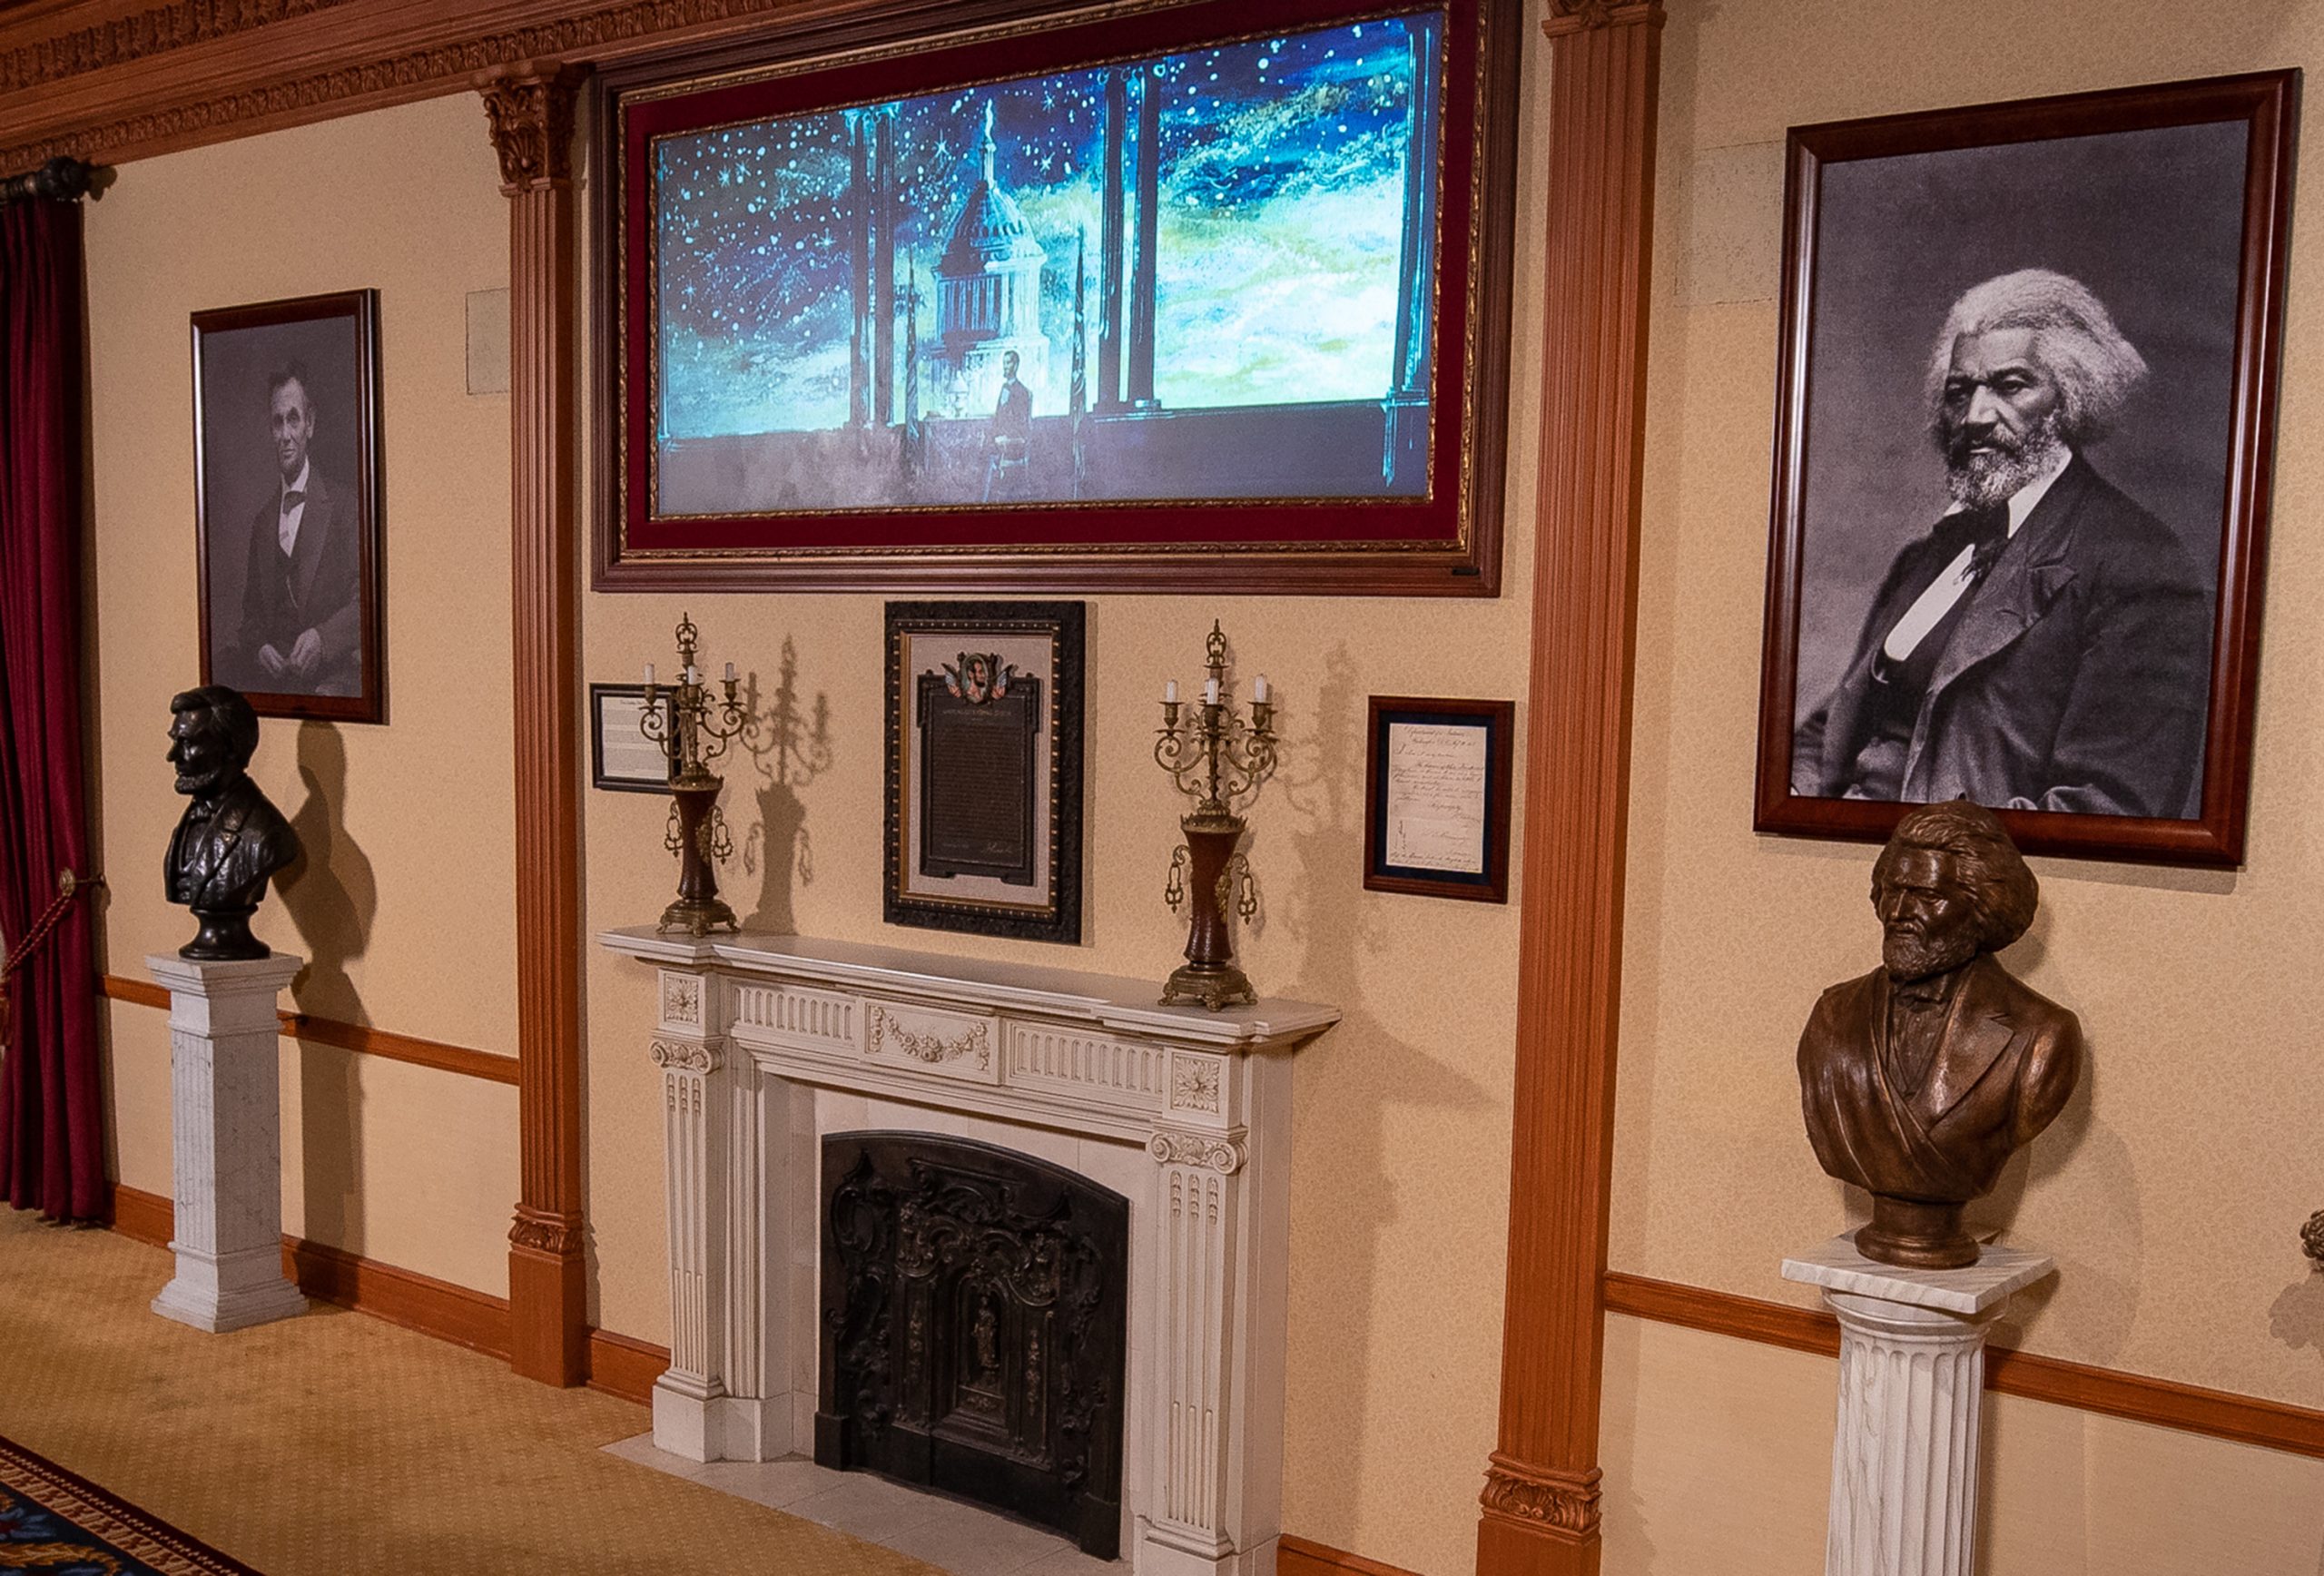 Disneyland’s ‘Great Moments with Mr. Lincoln’ Gets New Feature Honoring Frederick Douglass